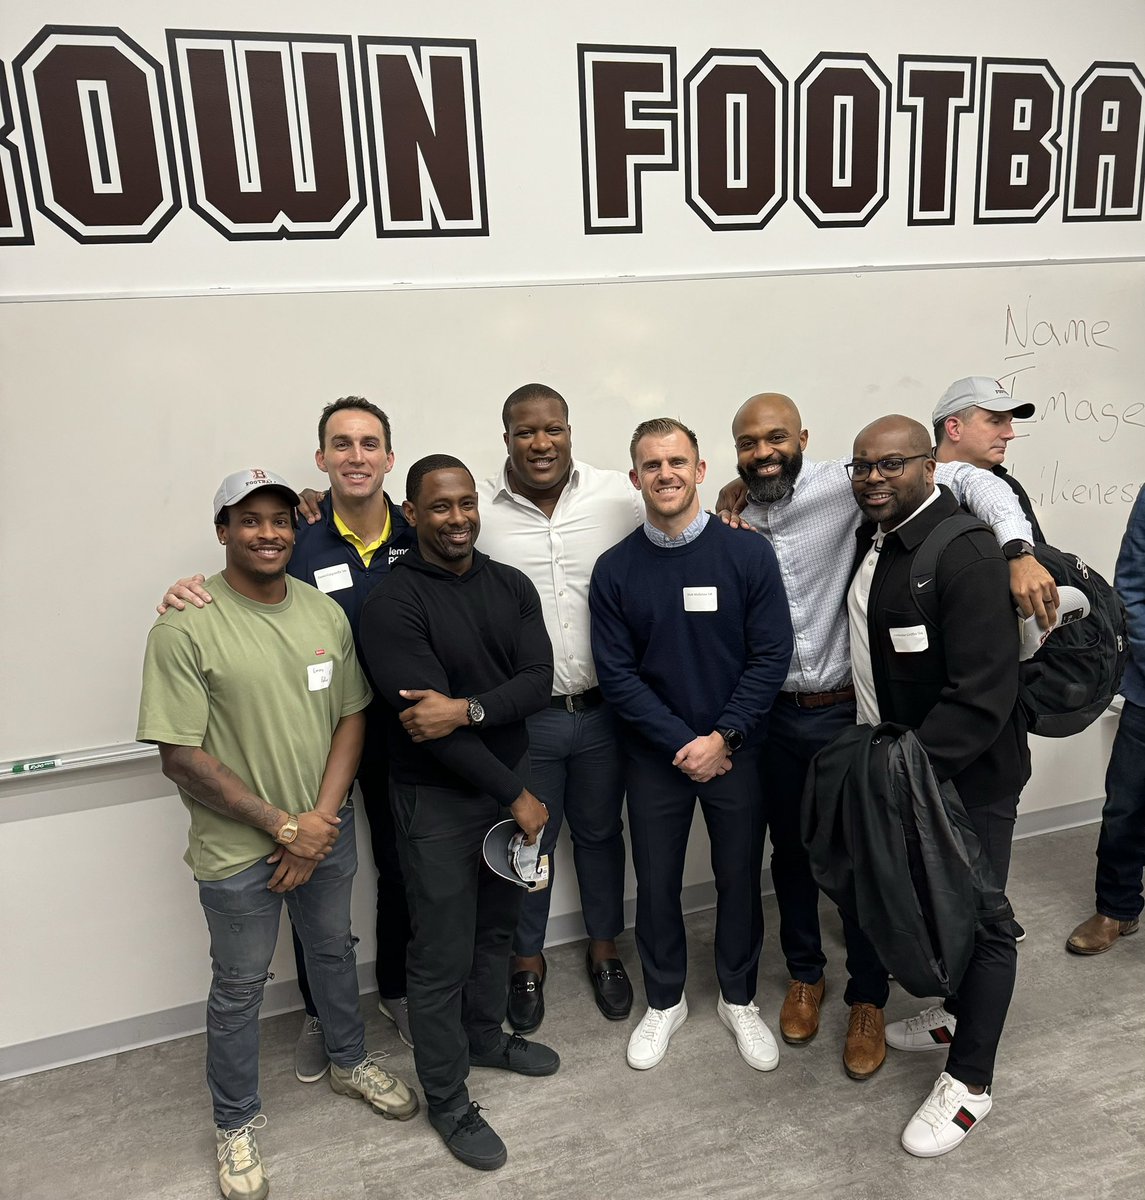 We had an amazing day yesterday at our annual career day @BrownU_Football with 50 alumni in attendance to spend the day with our players and help them to navigate their future. We can not thank them and all our alumni enough who do everything to help our players and our program